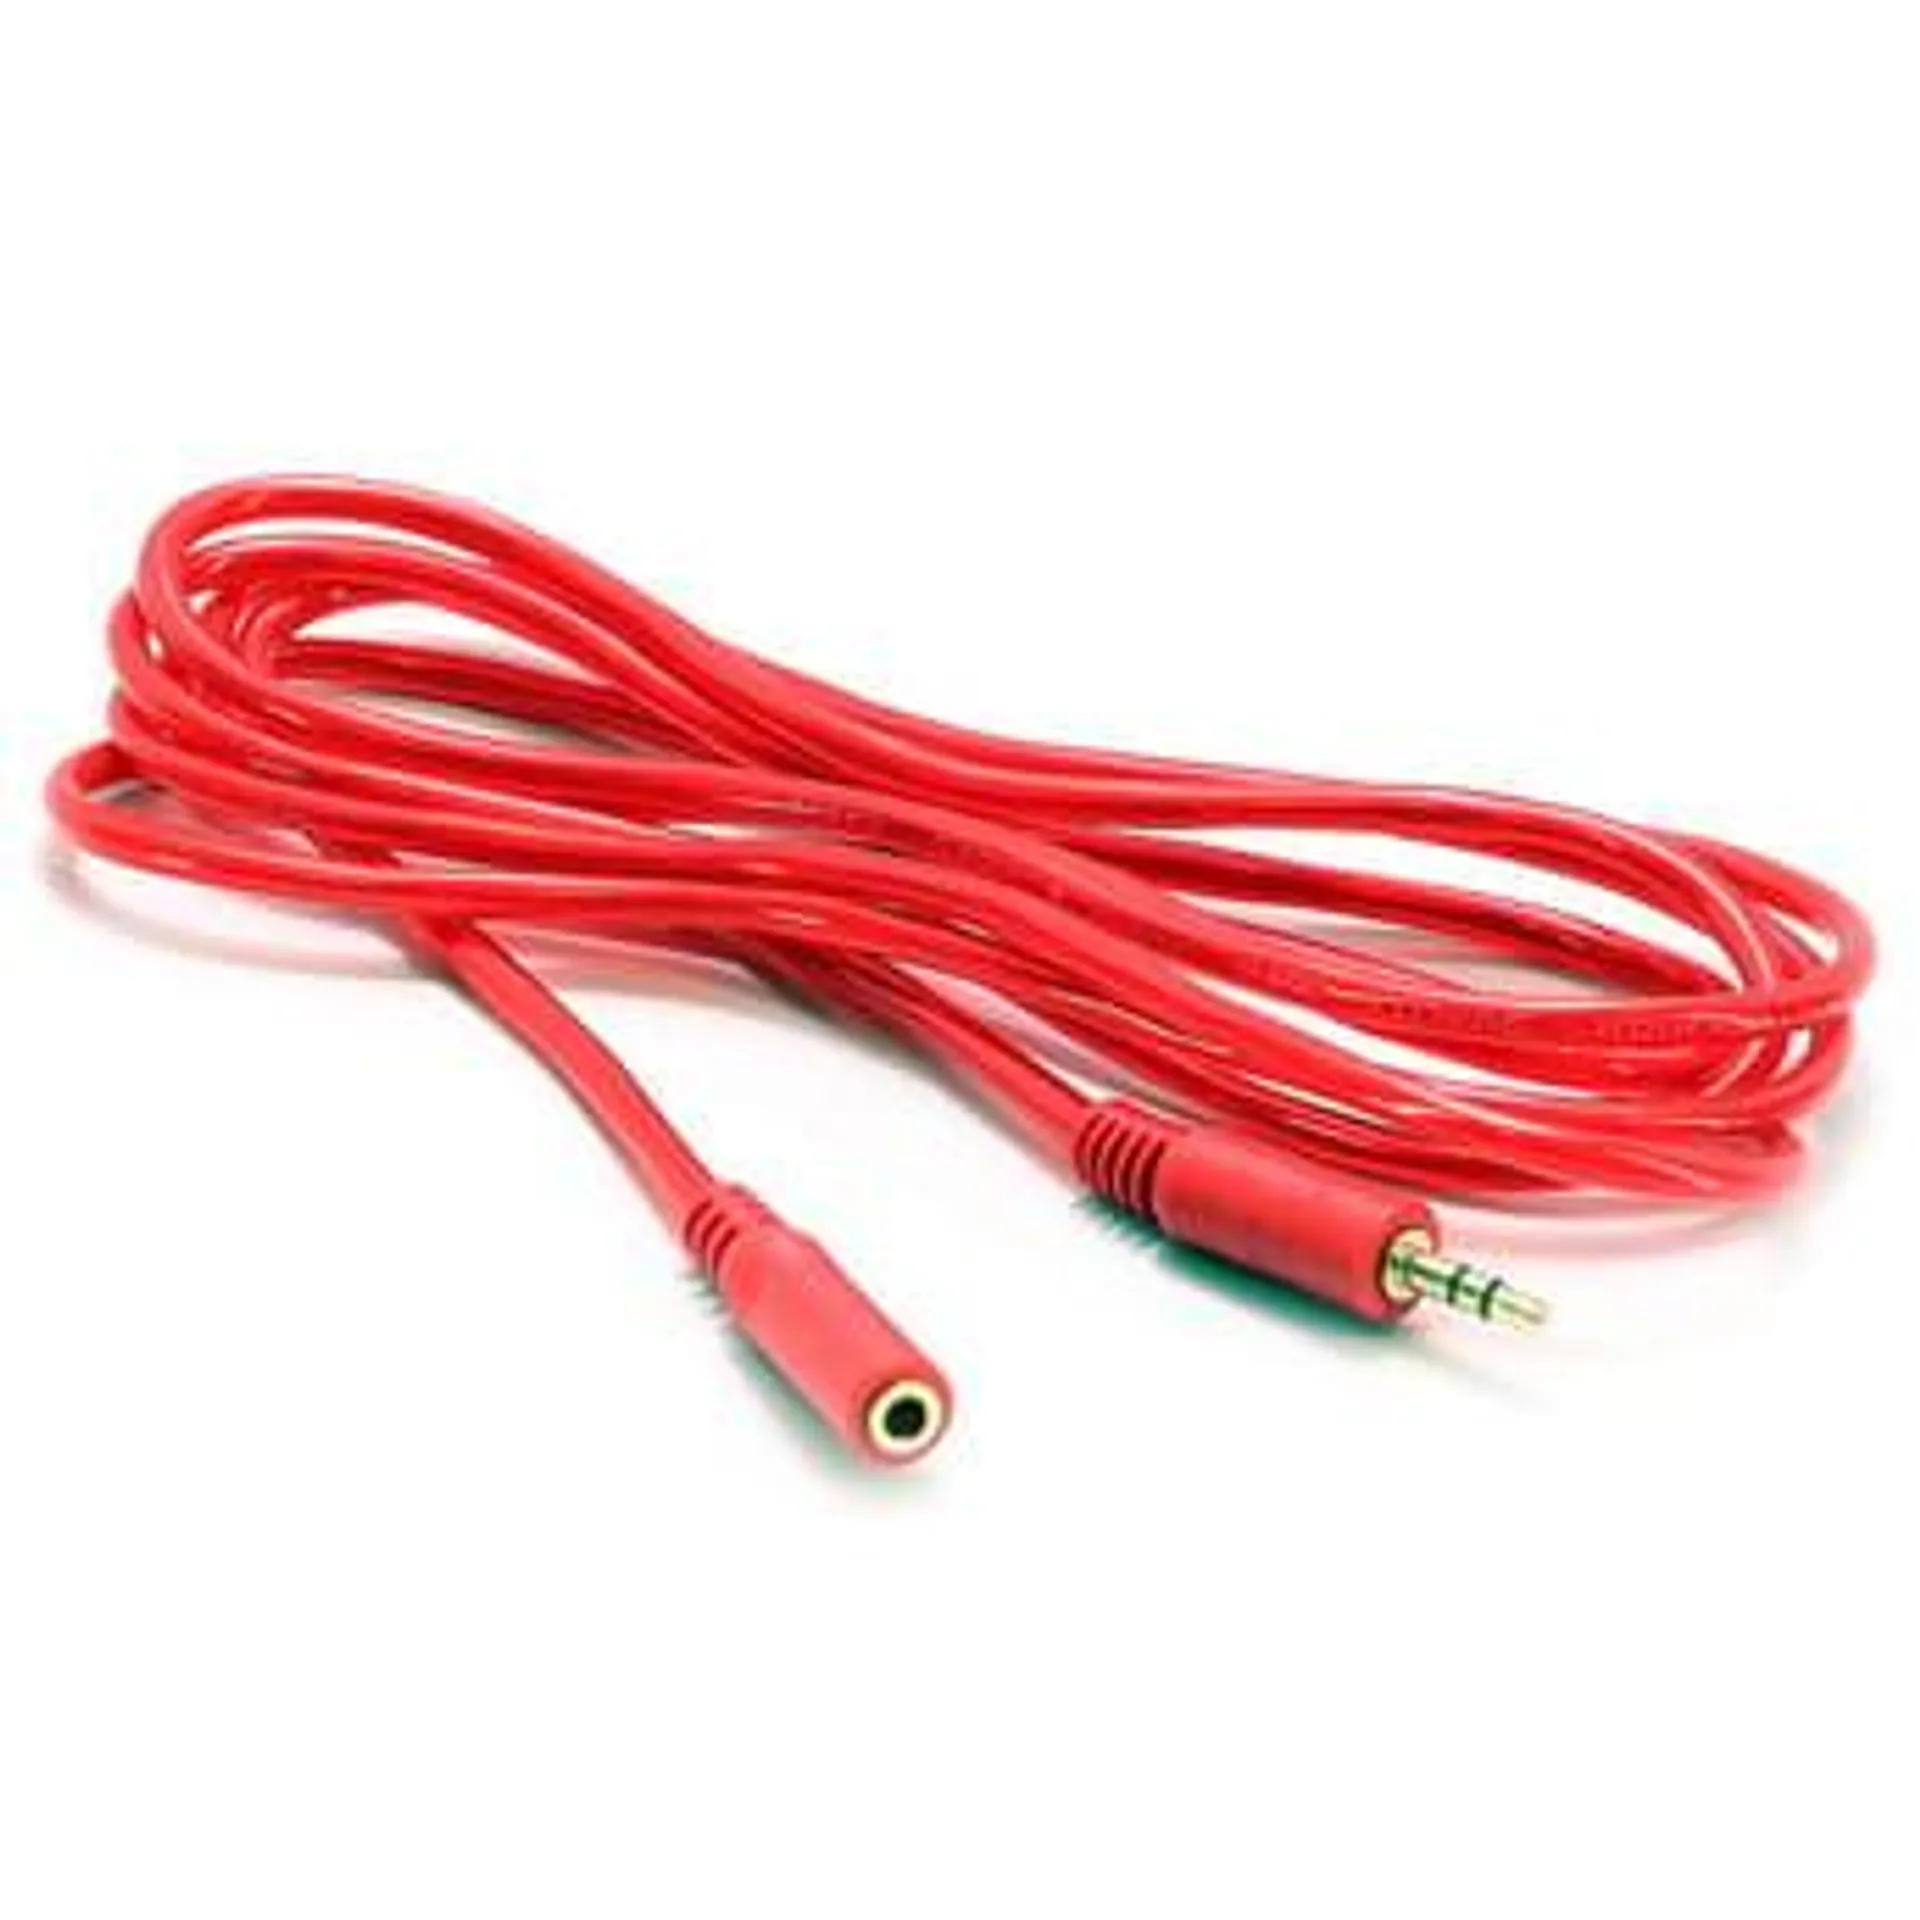 Cyberdyne 3.5mm Stereo Female to 3.5mm Stereo Male Cable (2m)